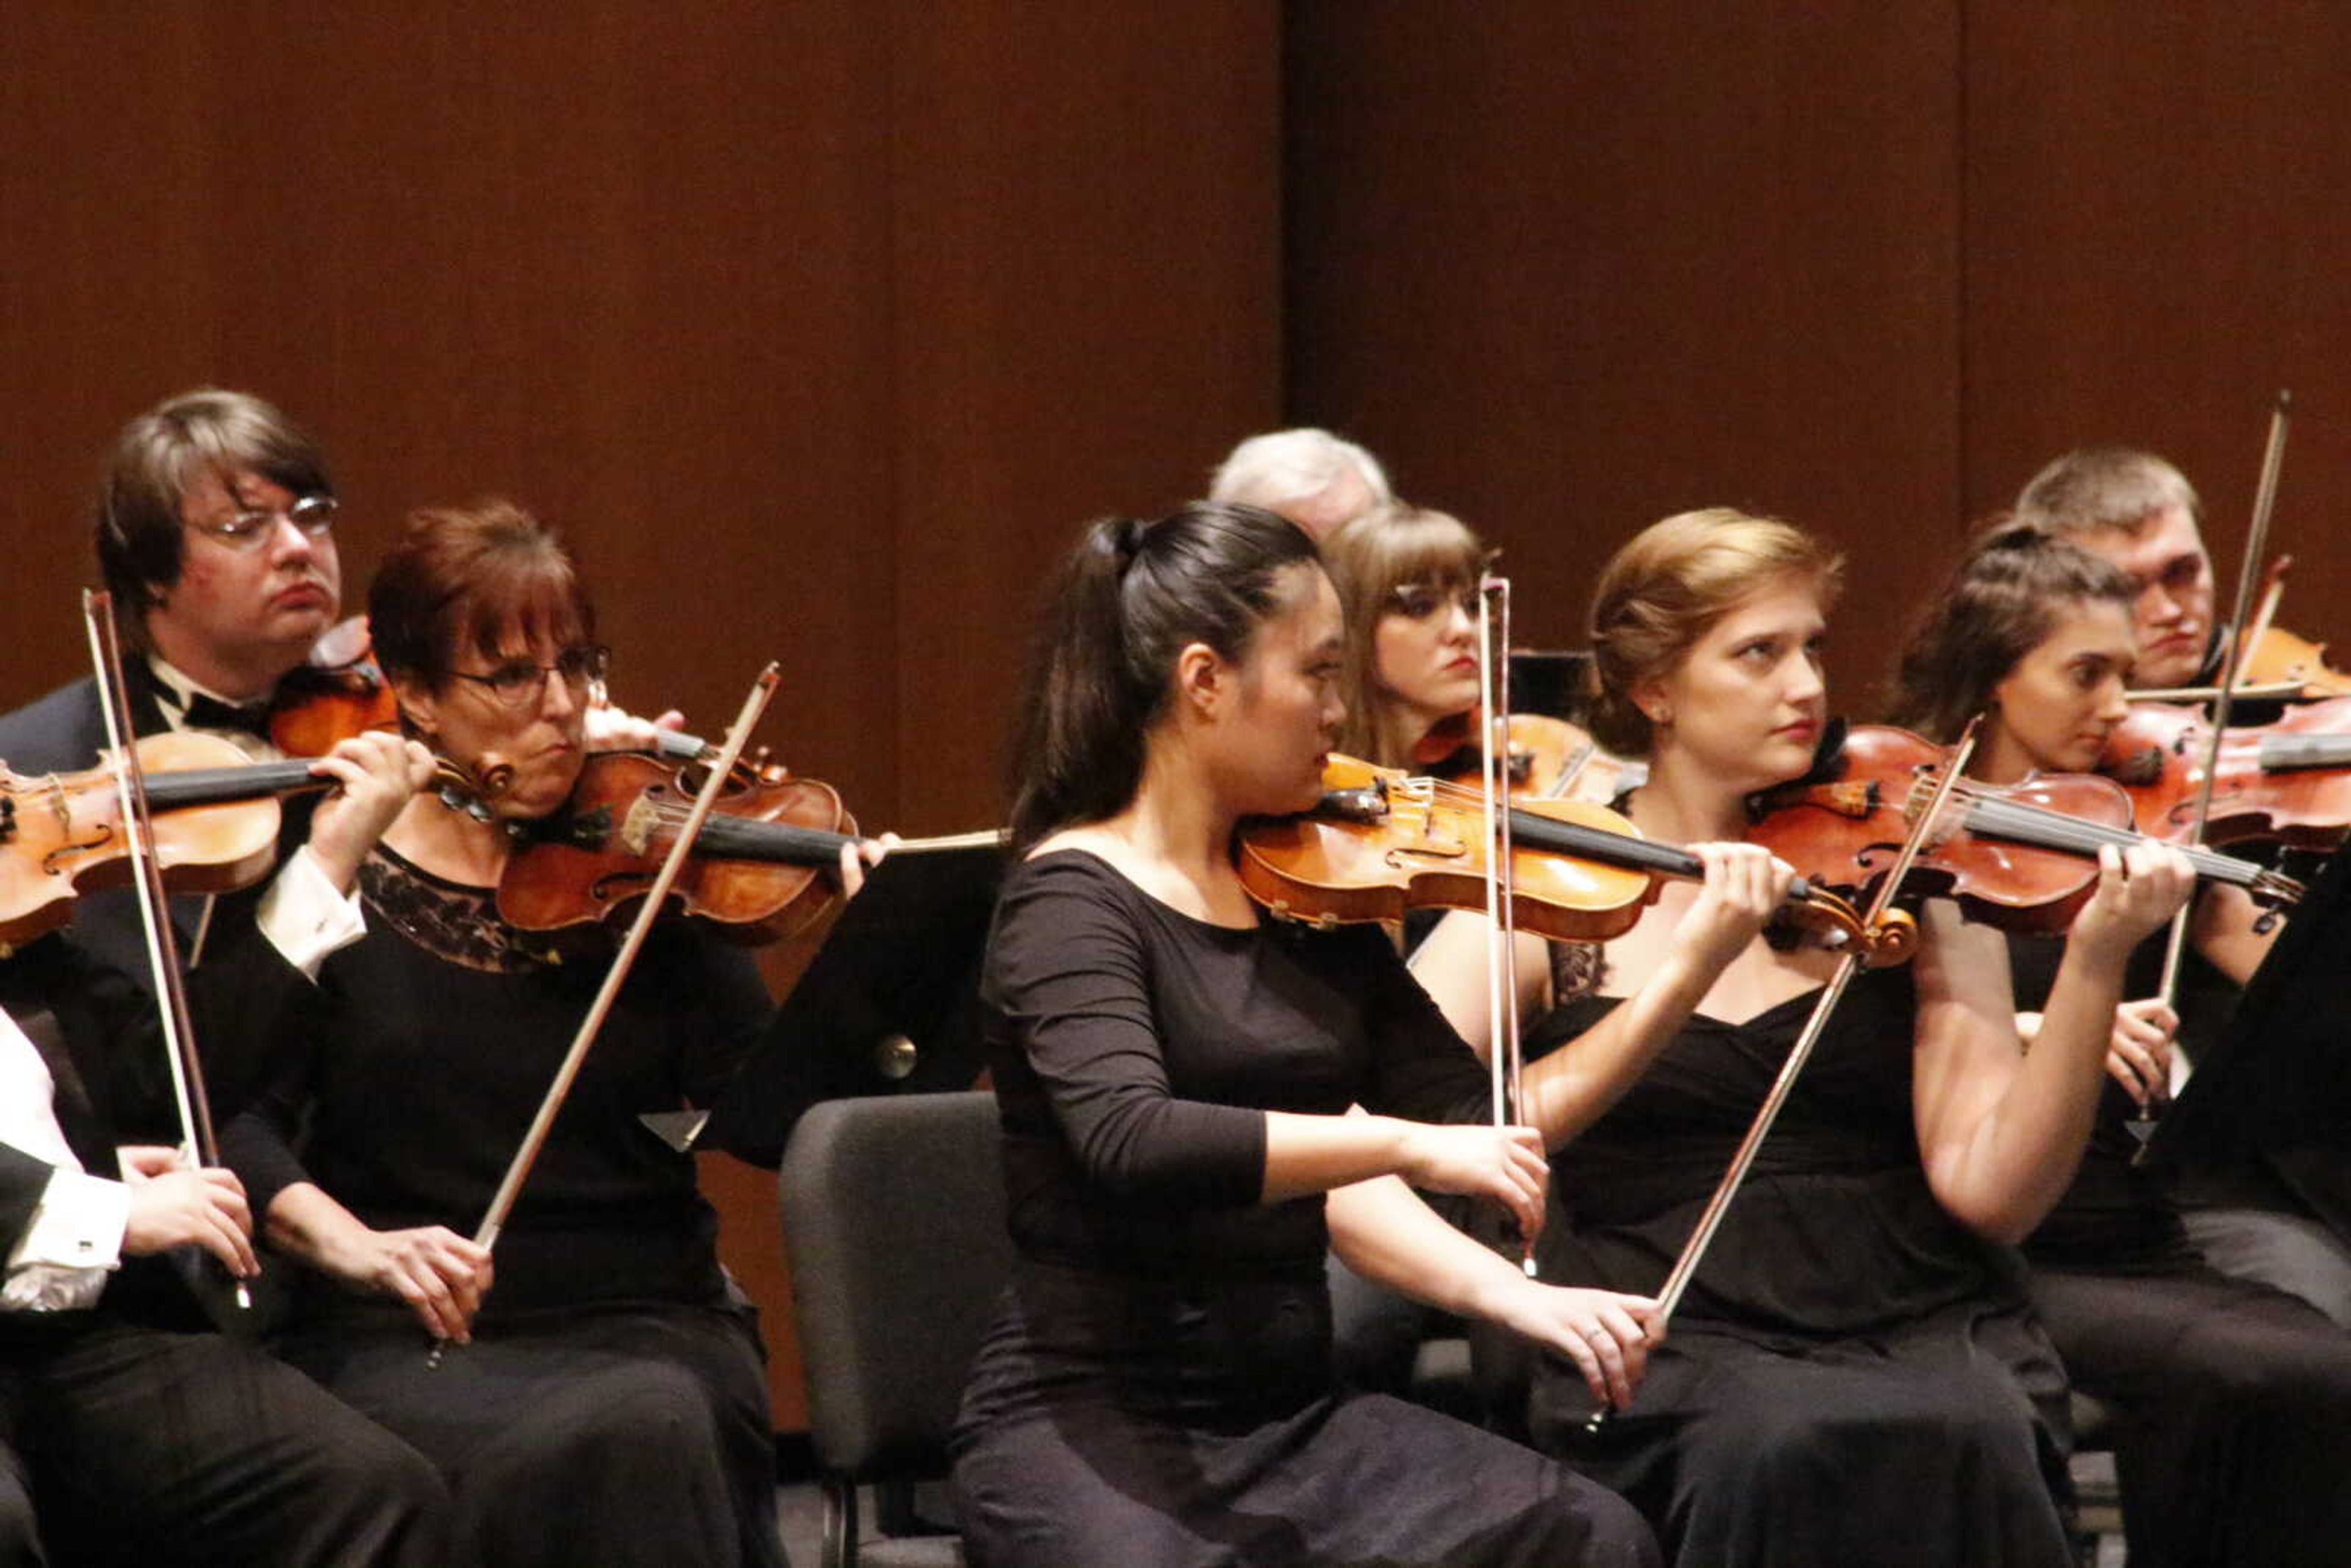 Southeast professor and concertmaster Sophia Han leads the Southeast Missouri Symphony Orchestra in a piece during the Gala Symphony opening concert in Bedell Hall on Oct. 10.